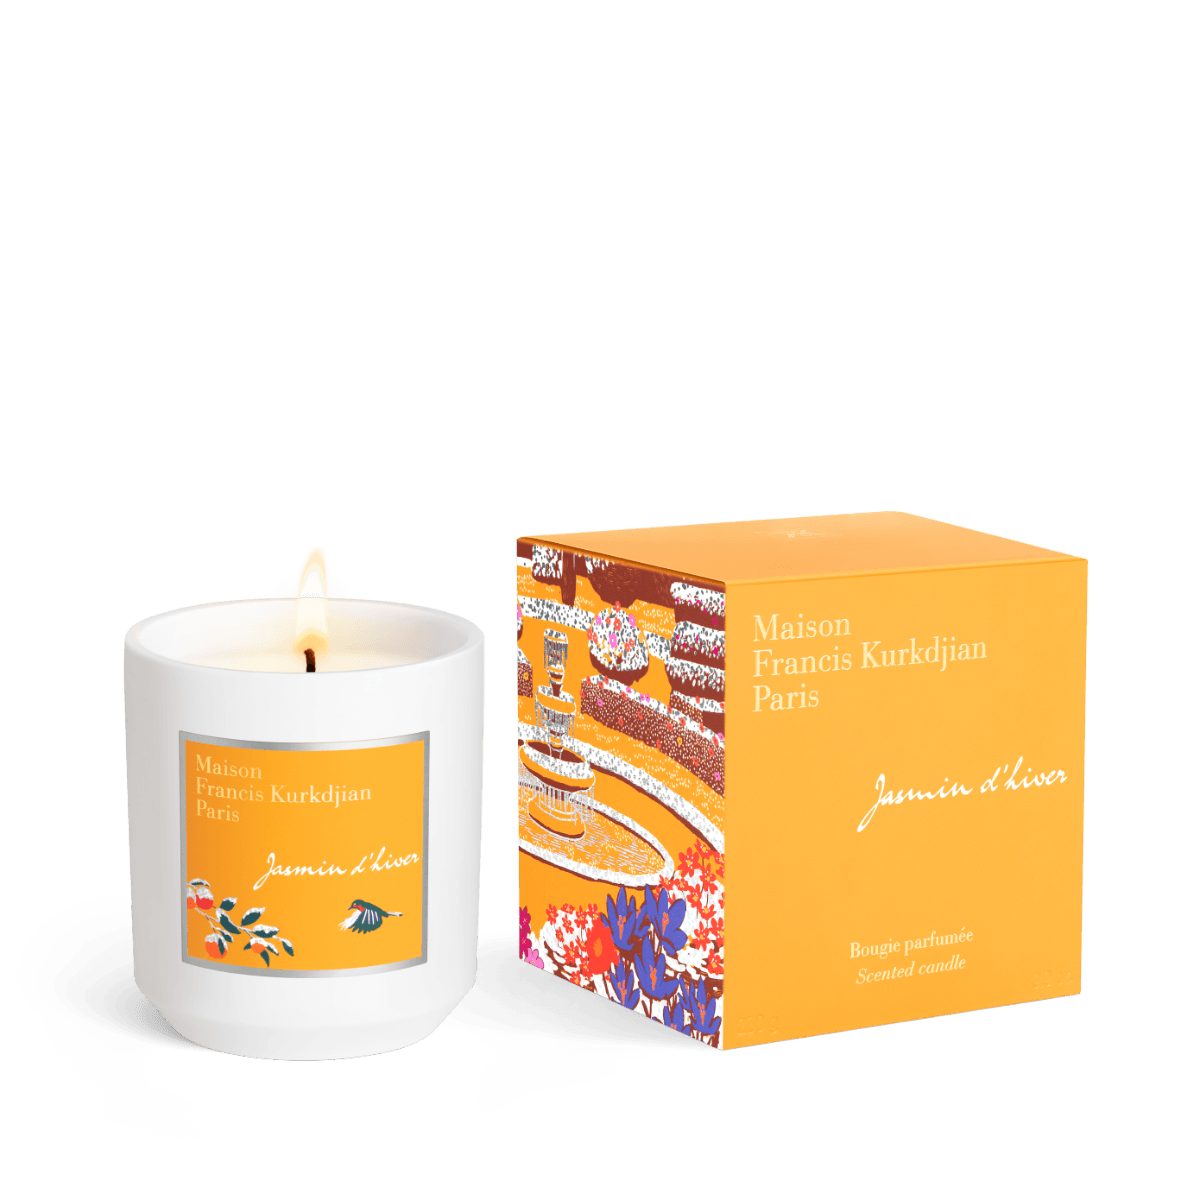 Image of Jasmin d'hiver scented candle by the perfume brand Maison Francis Kurkdjian